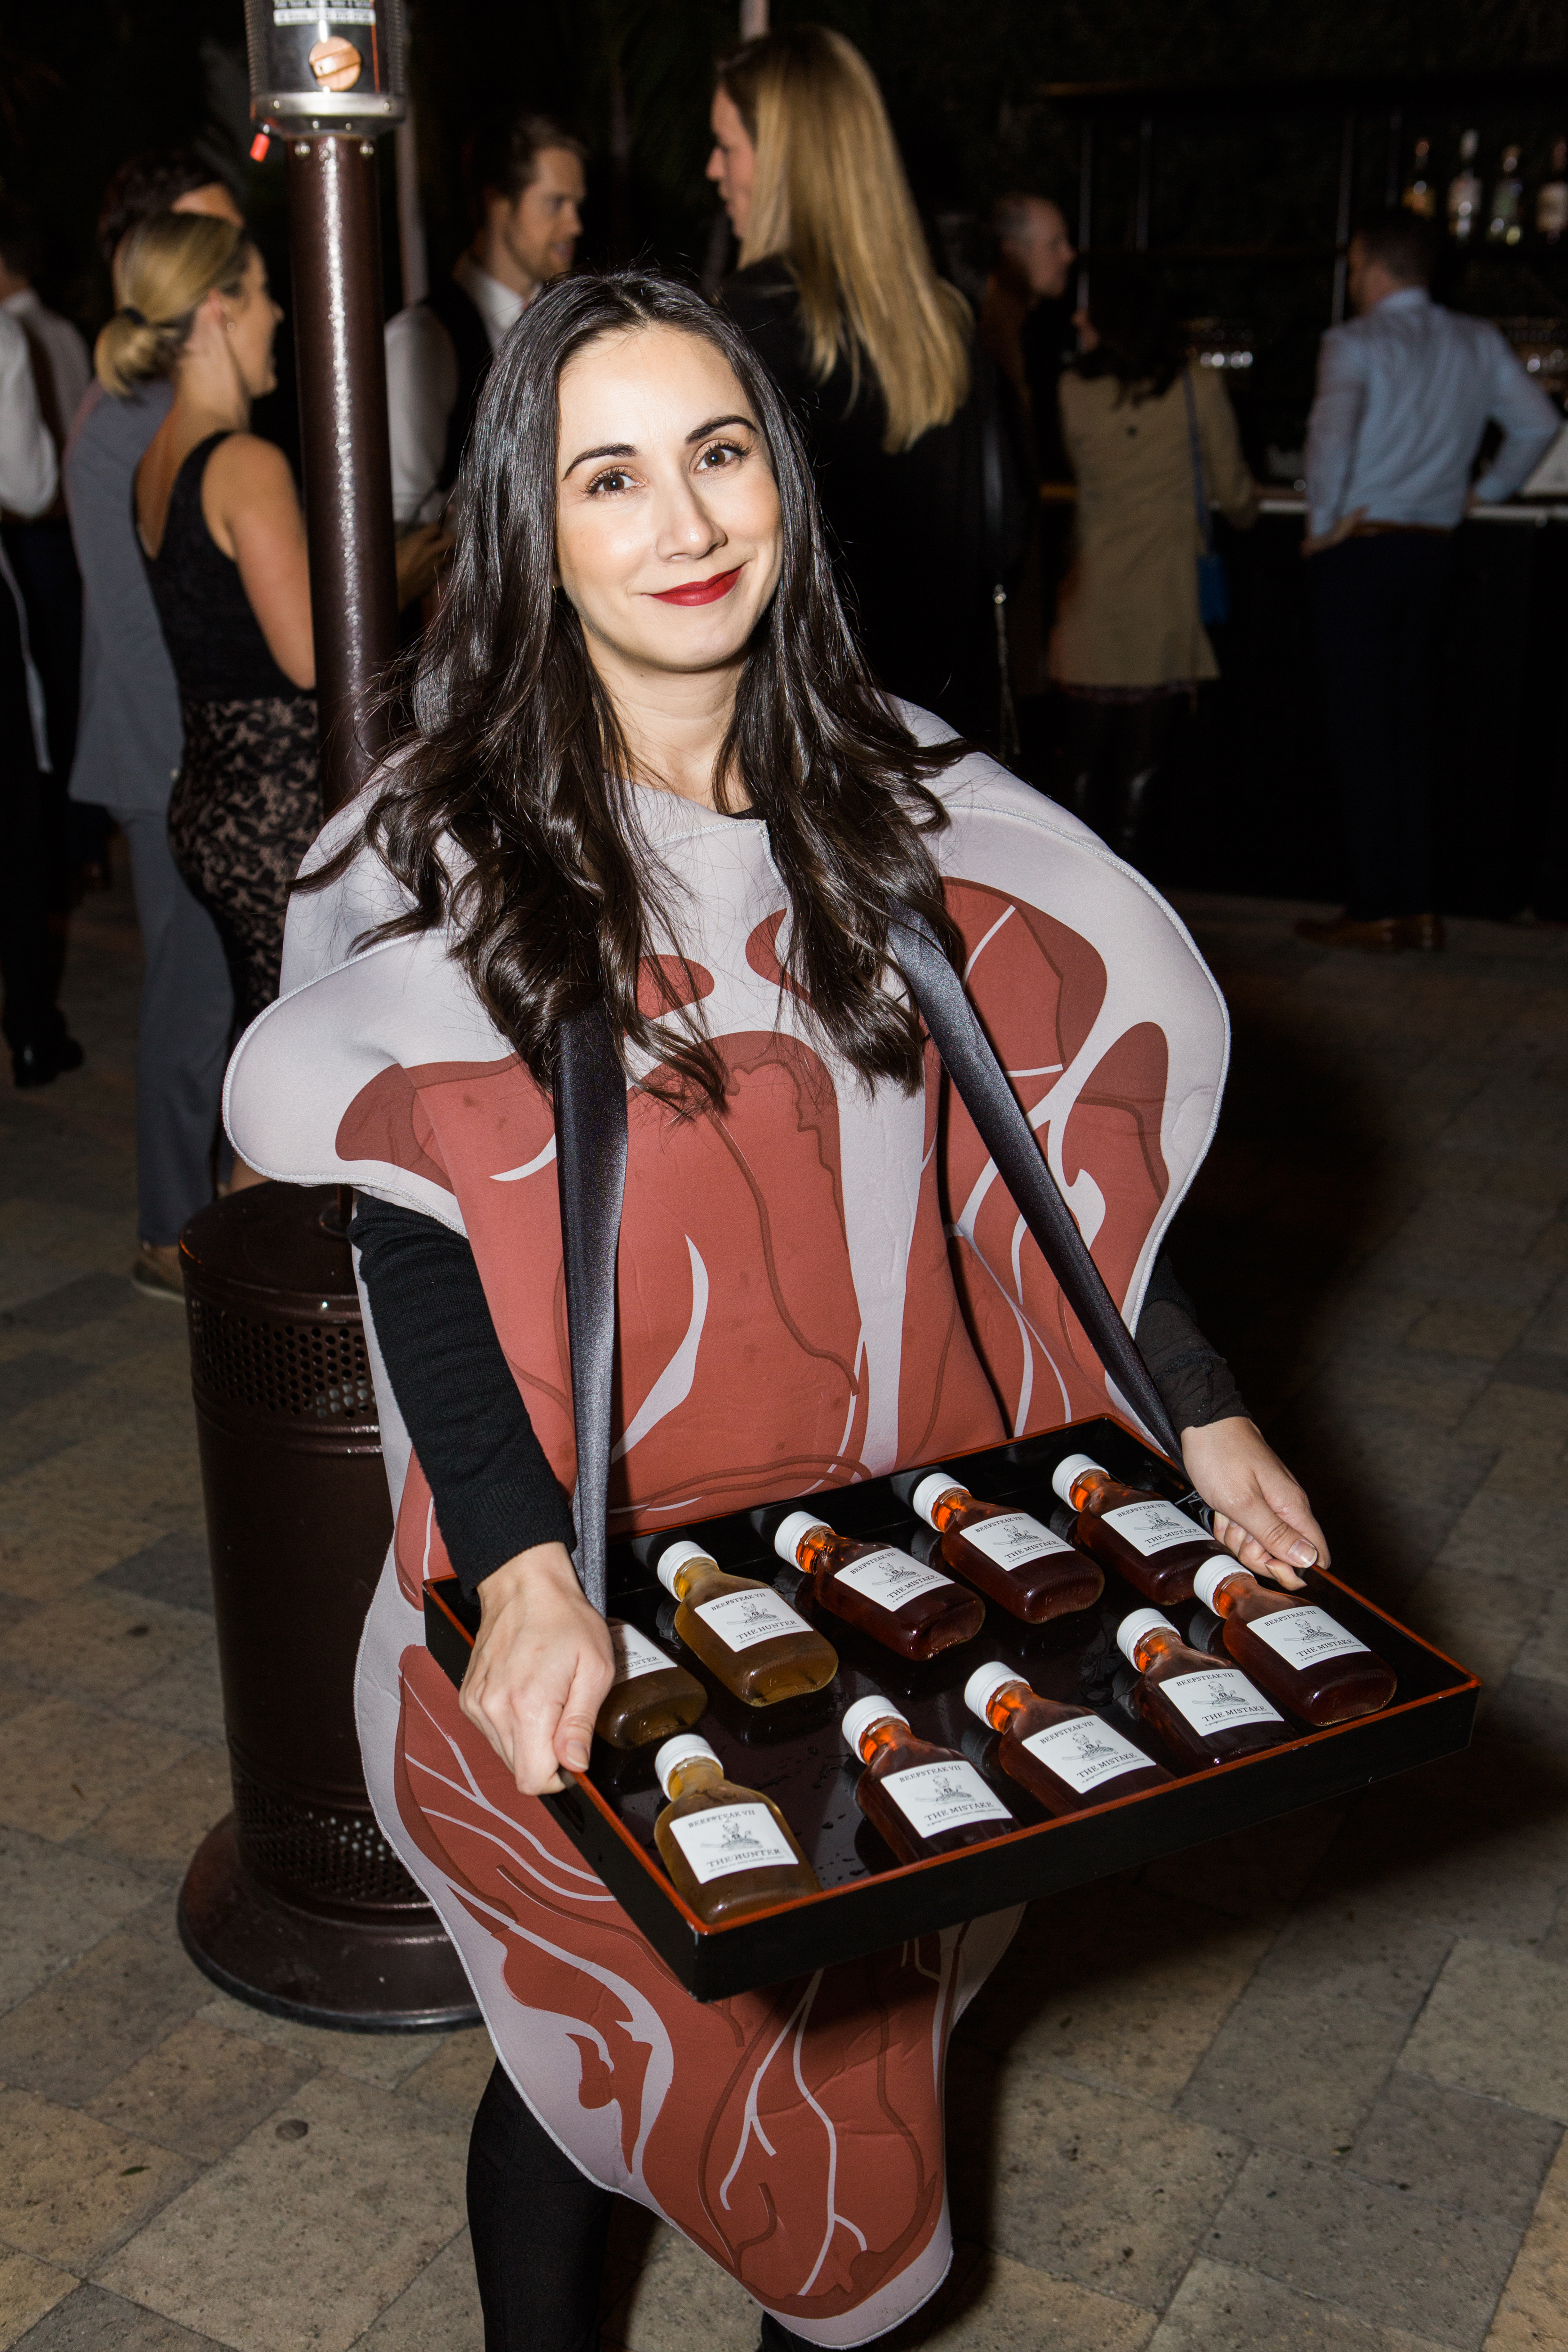 woman wearing steak costume and holding tray of whisky bottles